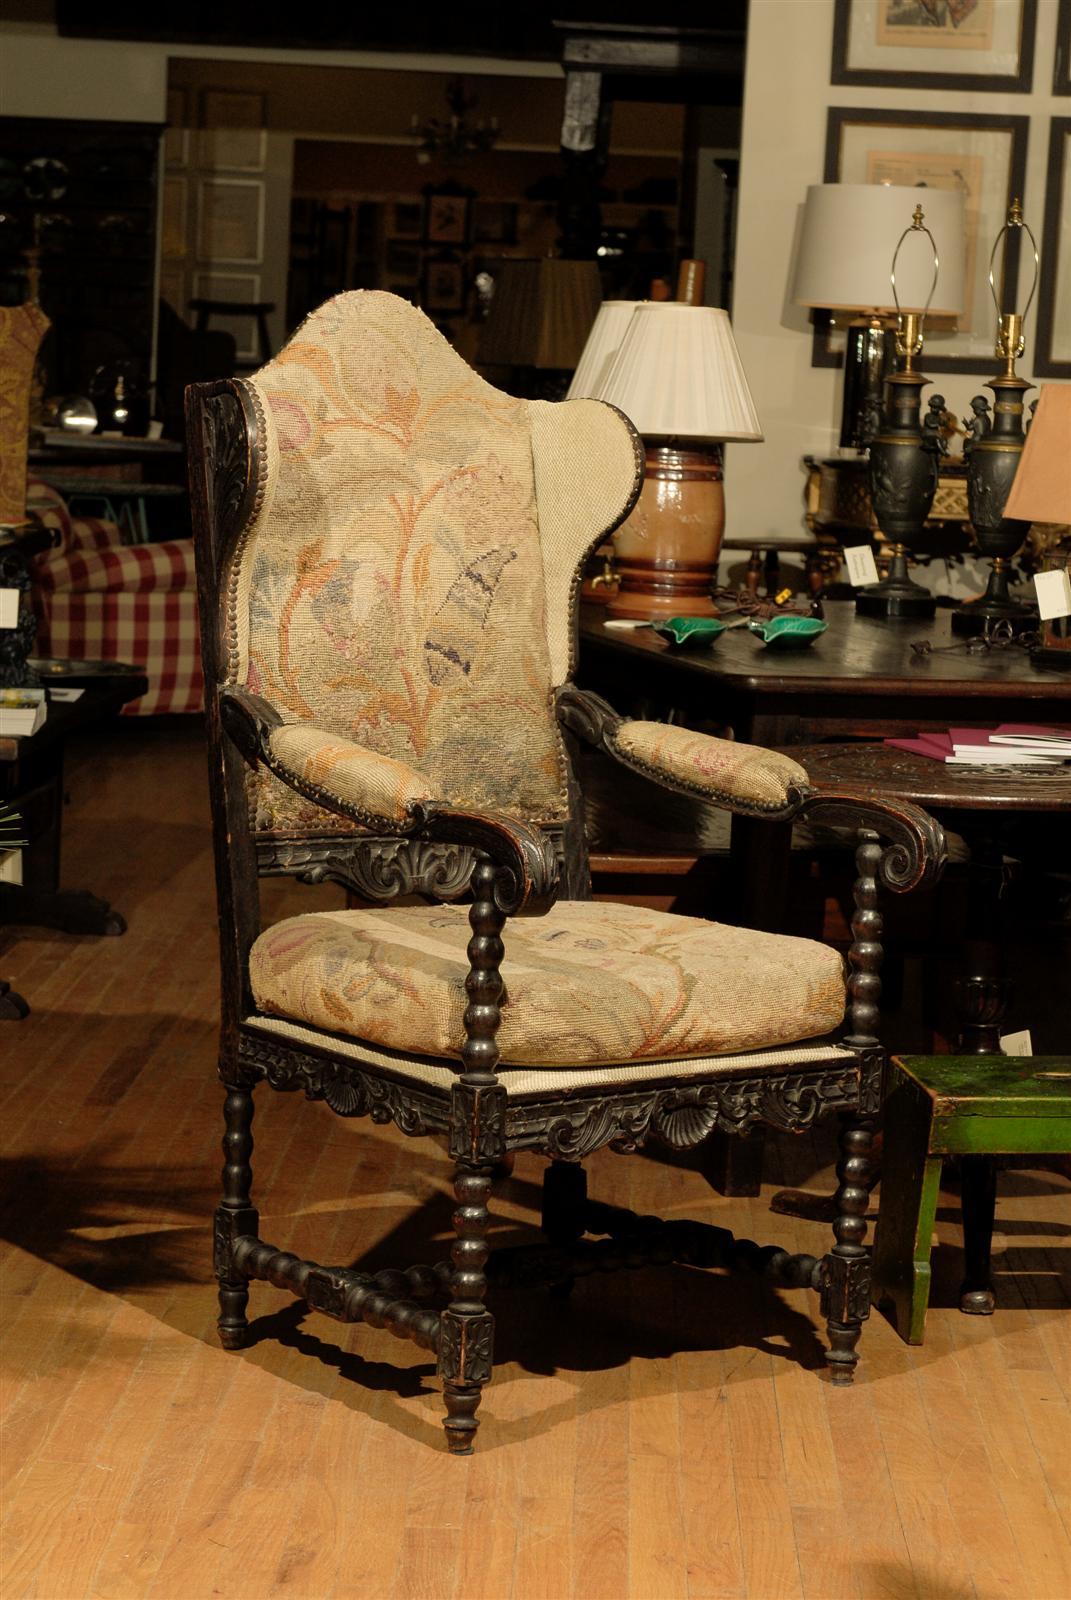 This is a wonderful wing chair with antique needlepoint. The chair appears to be,
Early 1800s. The carving is marvelous. The wings have new fabric. The cushion is in the original antiques needlepoint with new fabric as the seat deck.
This fabric